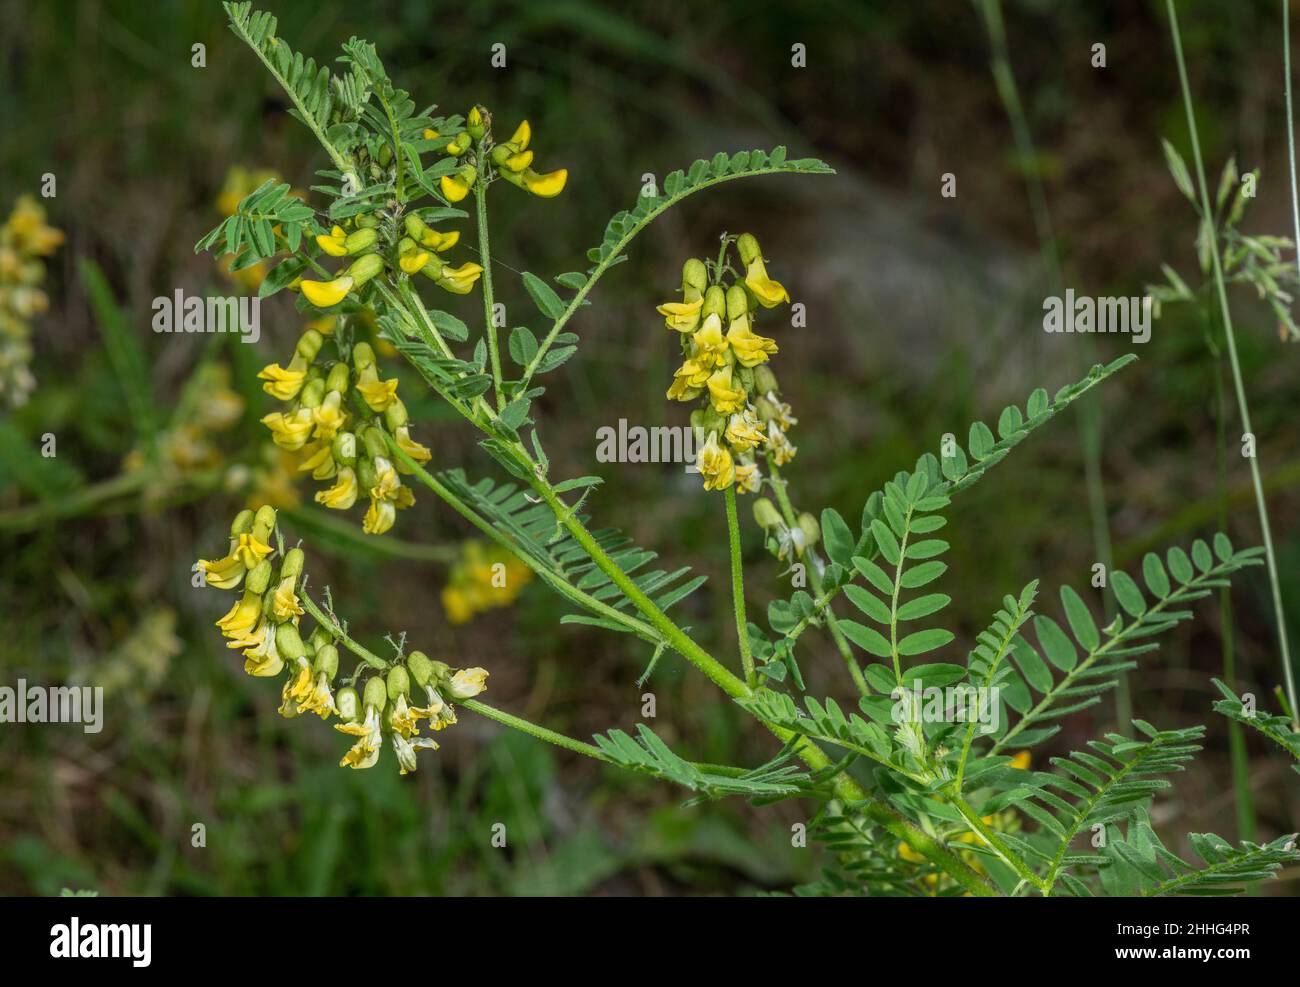 Mountain lentil, Astragalus penduliflorus, in flower in grassland in the Swiss Alps. Stock Photo